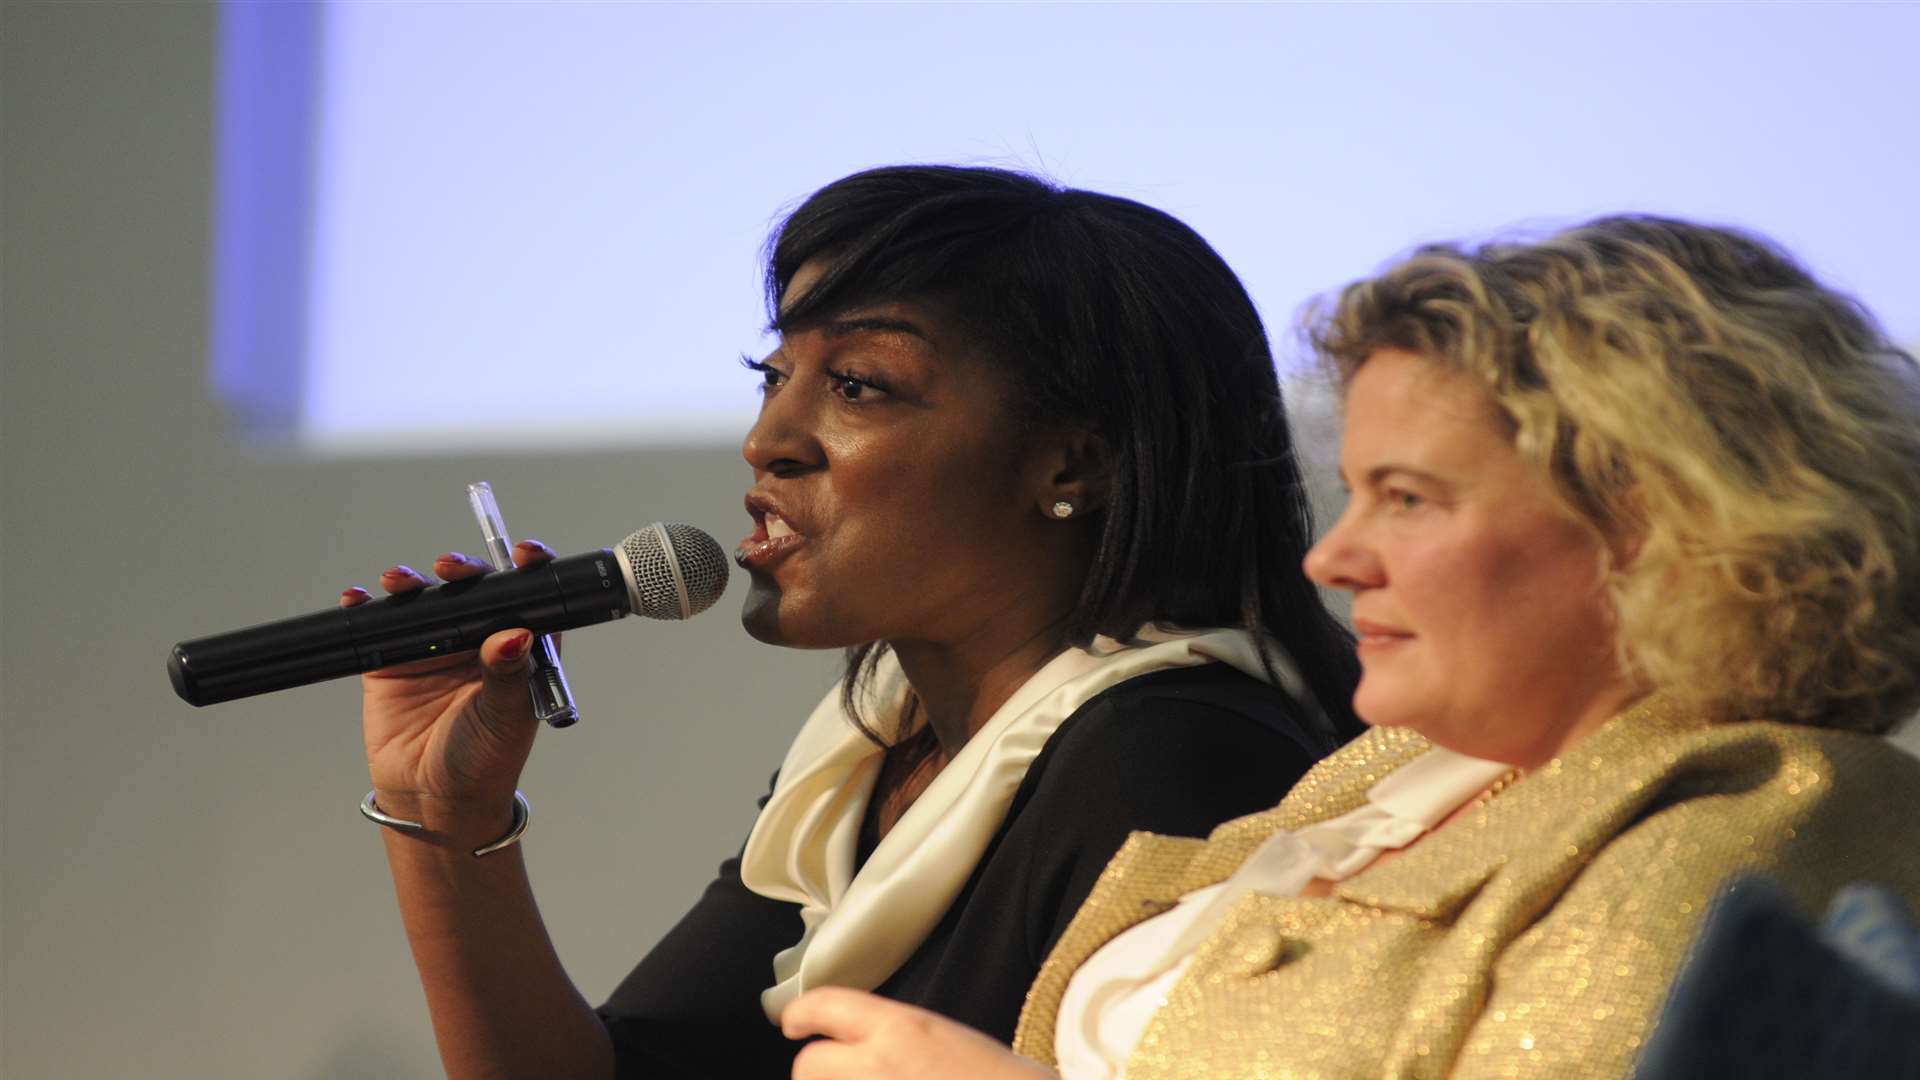 Family barrister Sophia Cannon, left, spoke at the event, pictured next to The Sunday Times editorial director Eleanor Mills